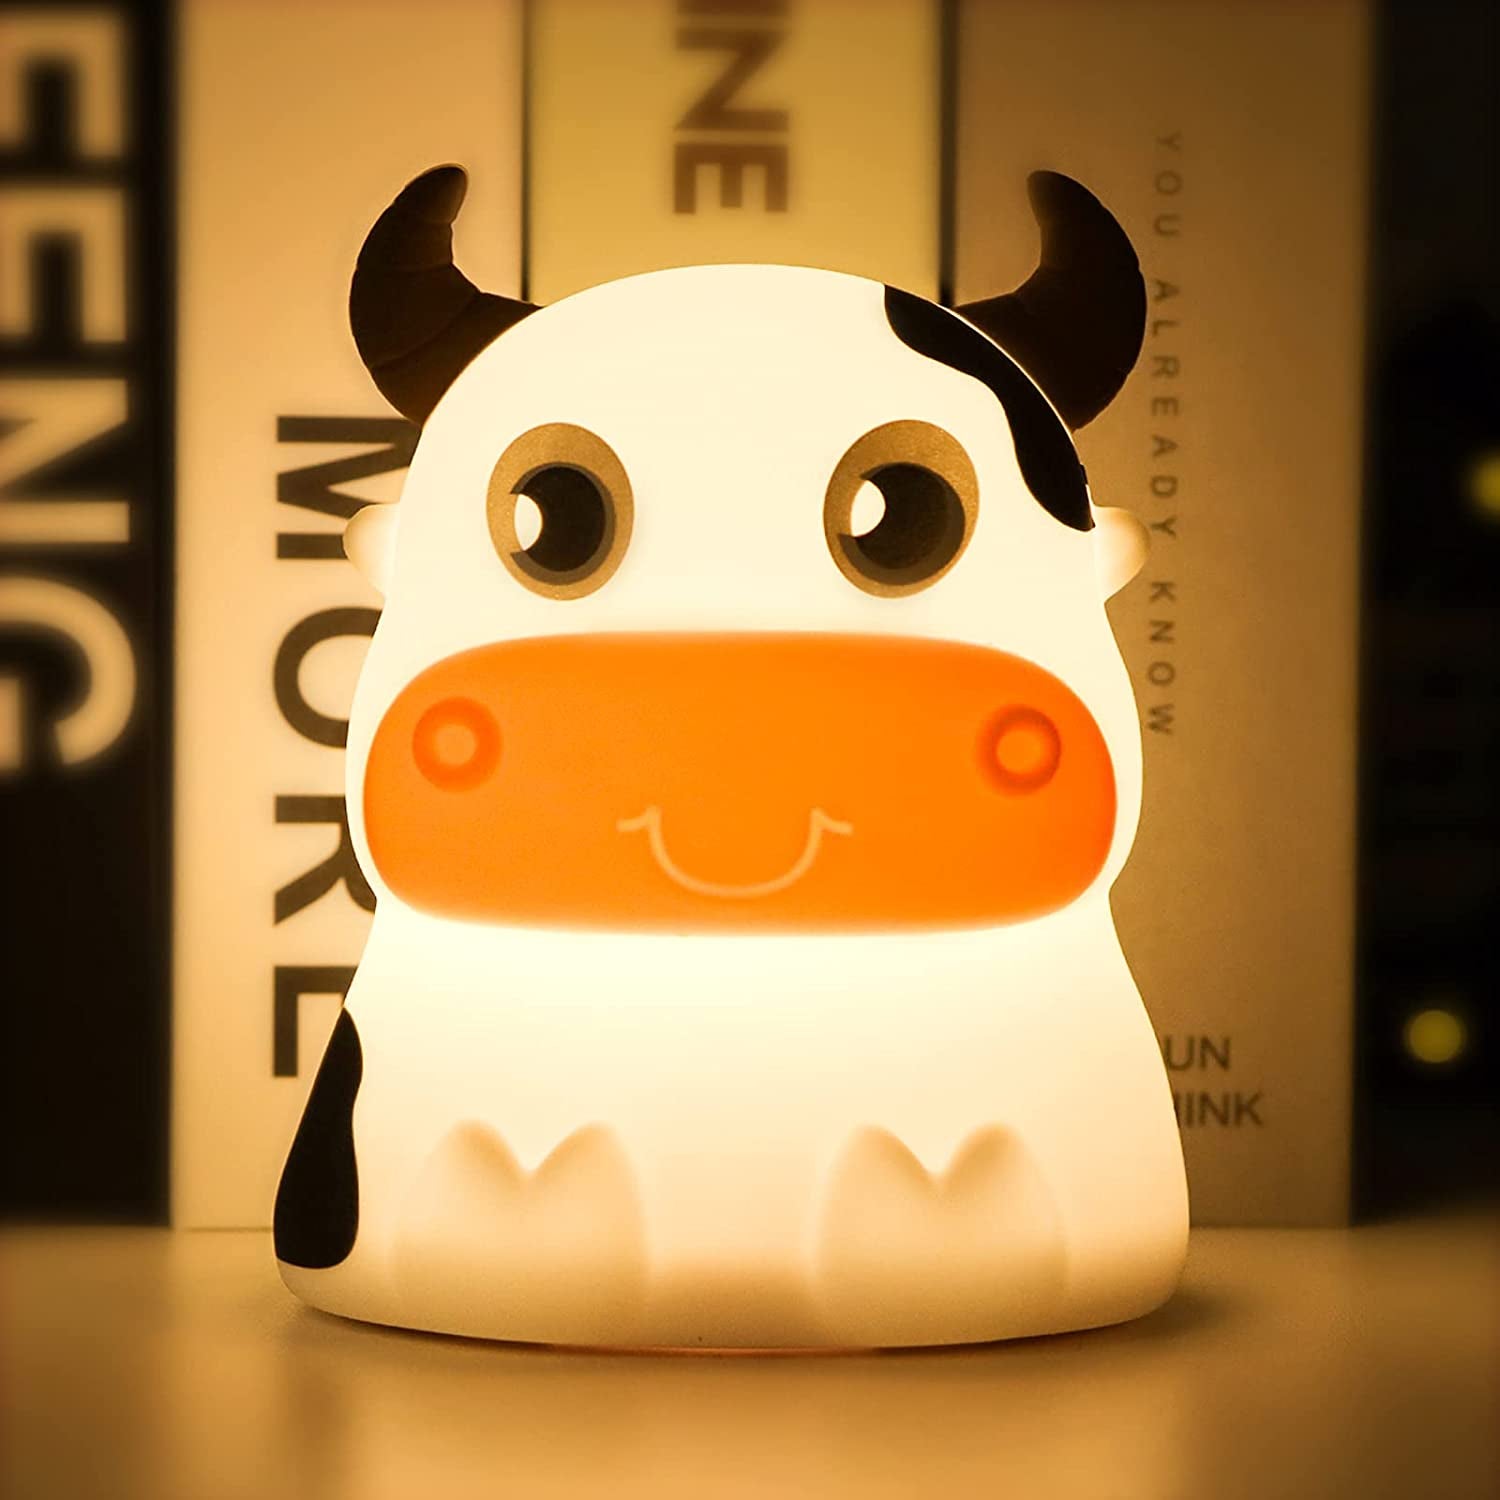 Night Light for Kids, Portable Tap Control Nightlight Lamp, 7 Colors Mode, Silicone Cute Animal Cow LED Nursery Night Lamp Bedroom Decor for Baby Infant or Toddler (Cows-Battery Powered)